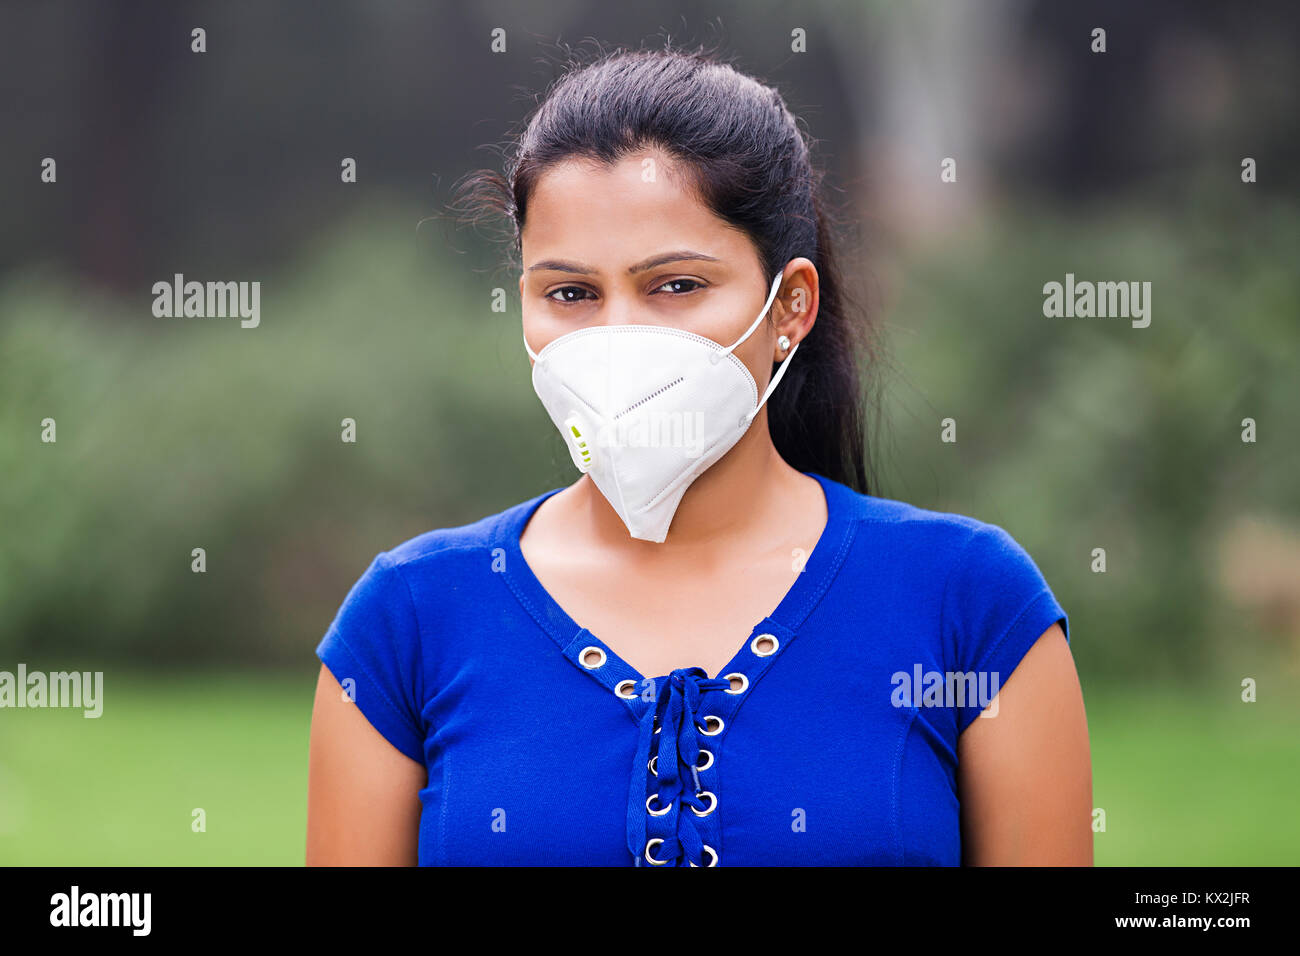 1 Person Park Pollution Swine Influenza Virus Young Woman Stock Photo